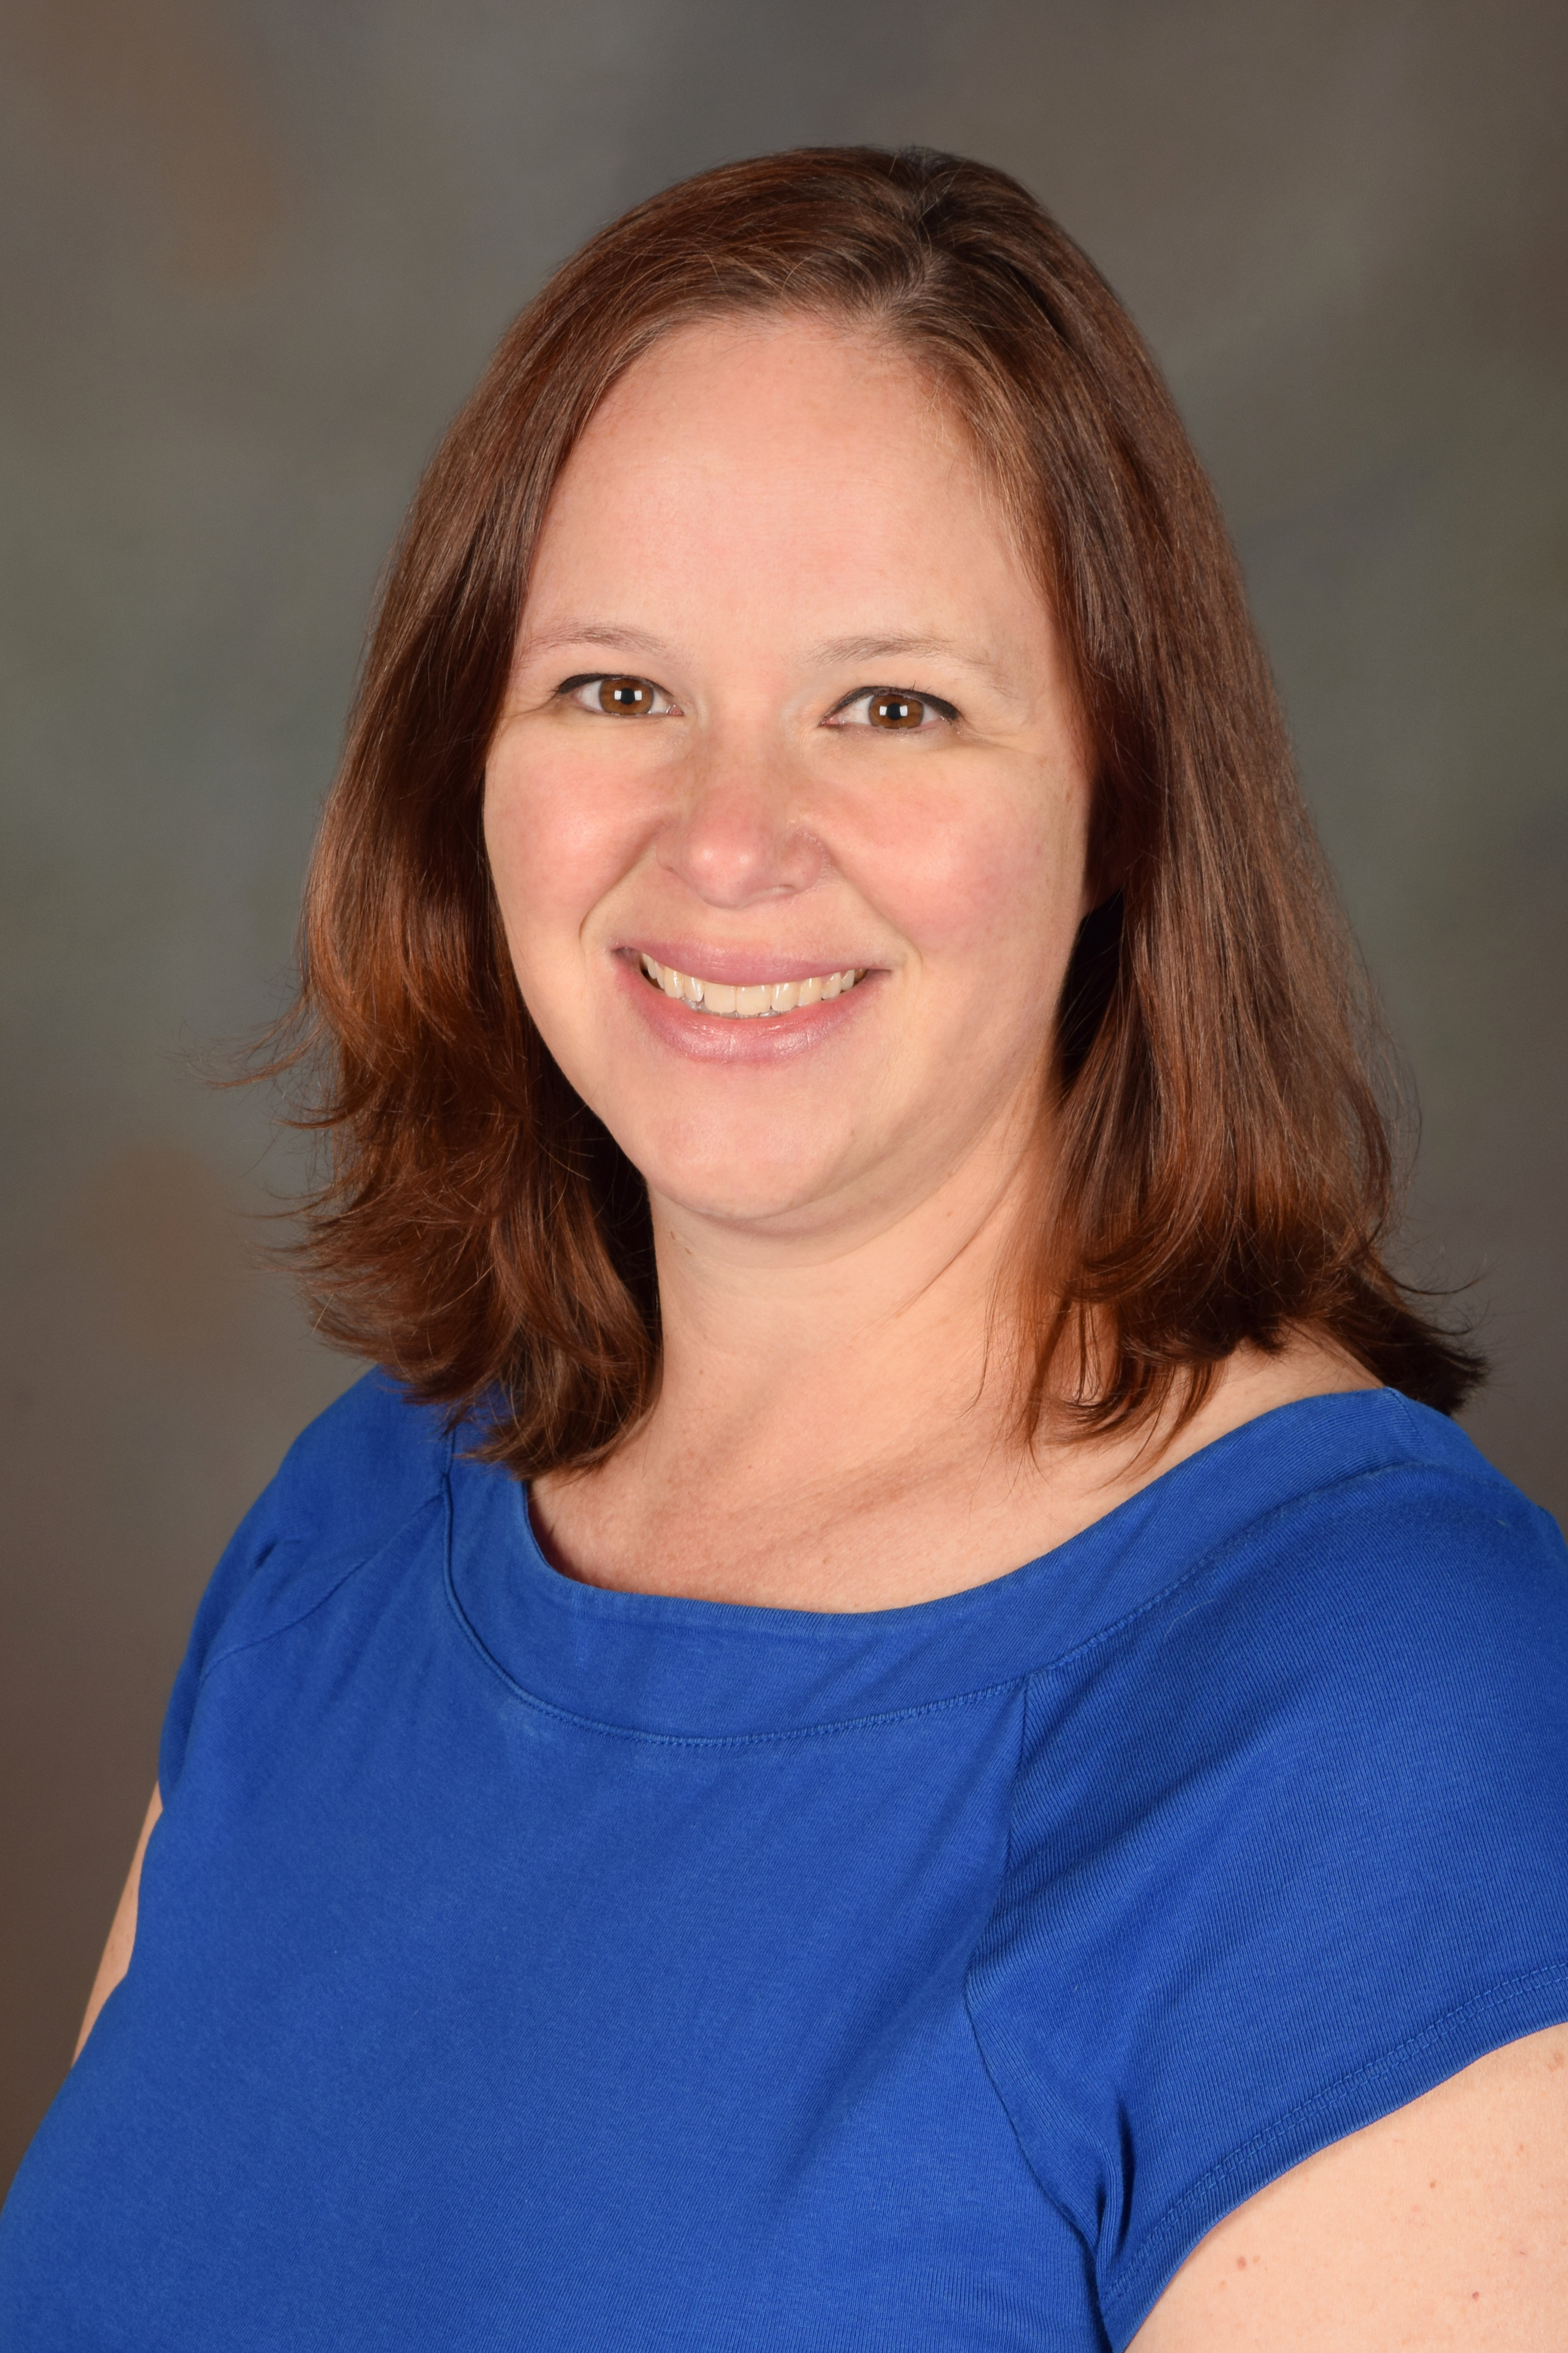 Kelly Jeans, M.S., is the assistant director of the Dallas campus Movement Science Lab at Scottish Rite for Children.